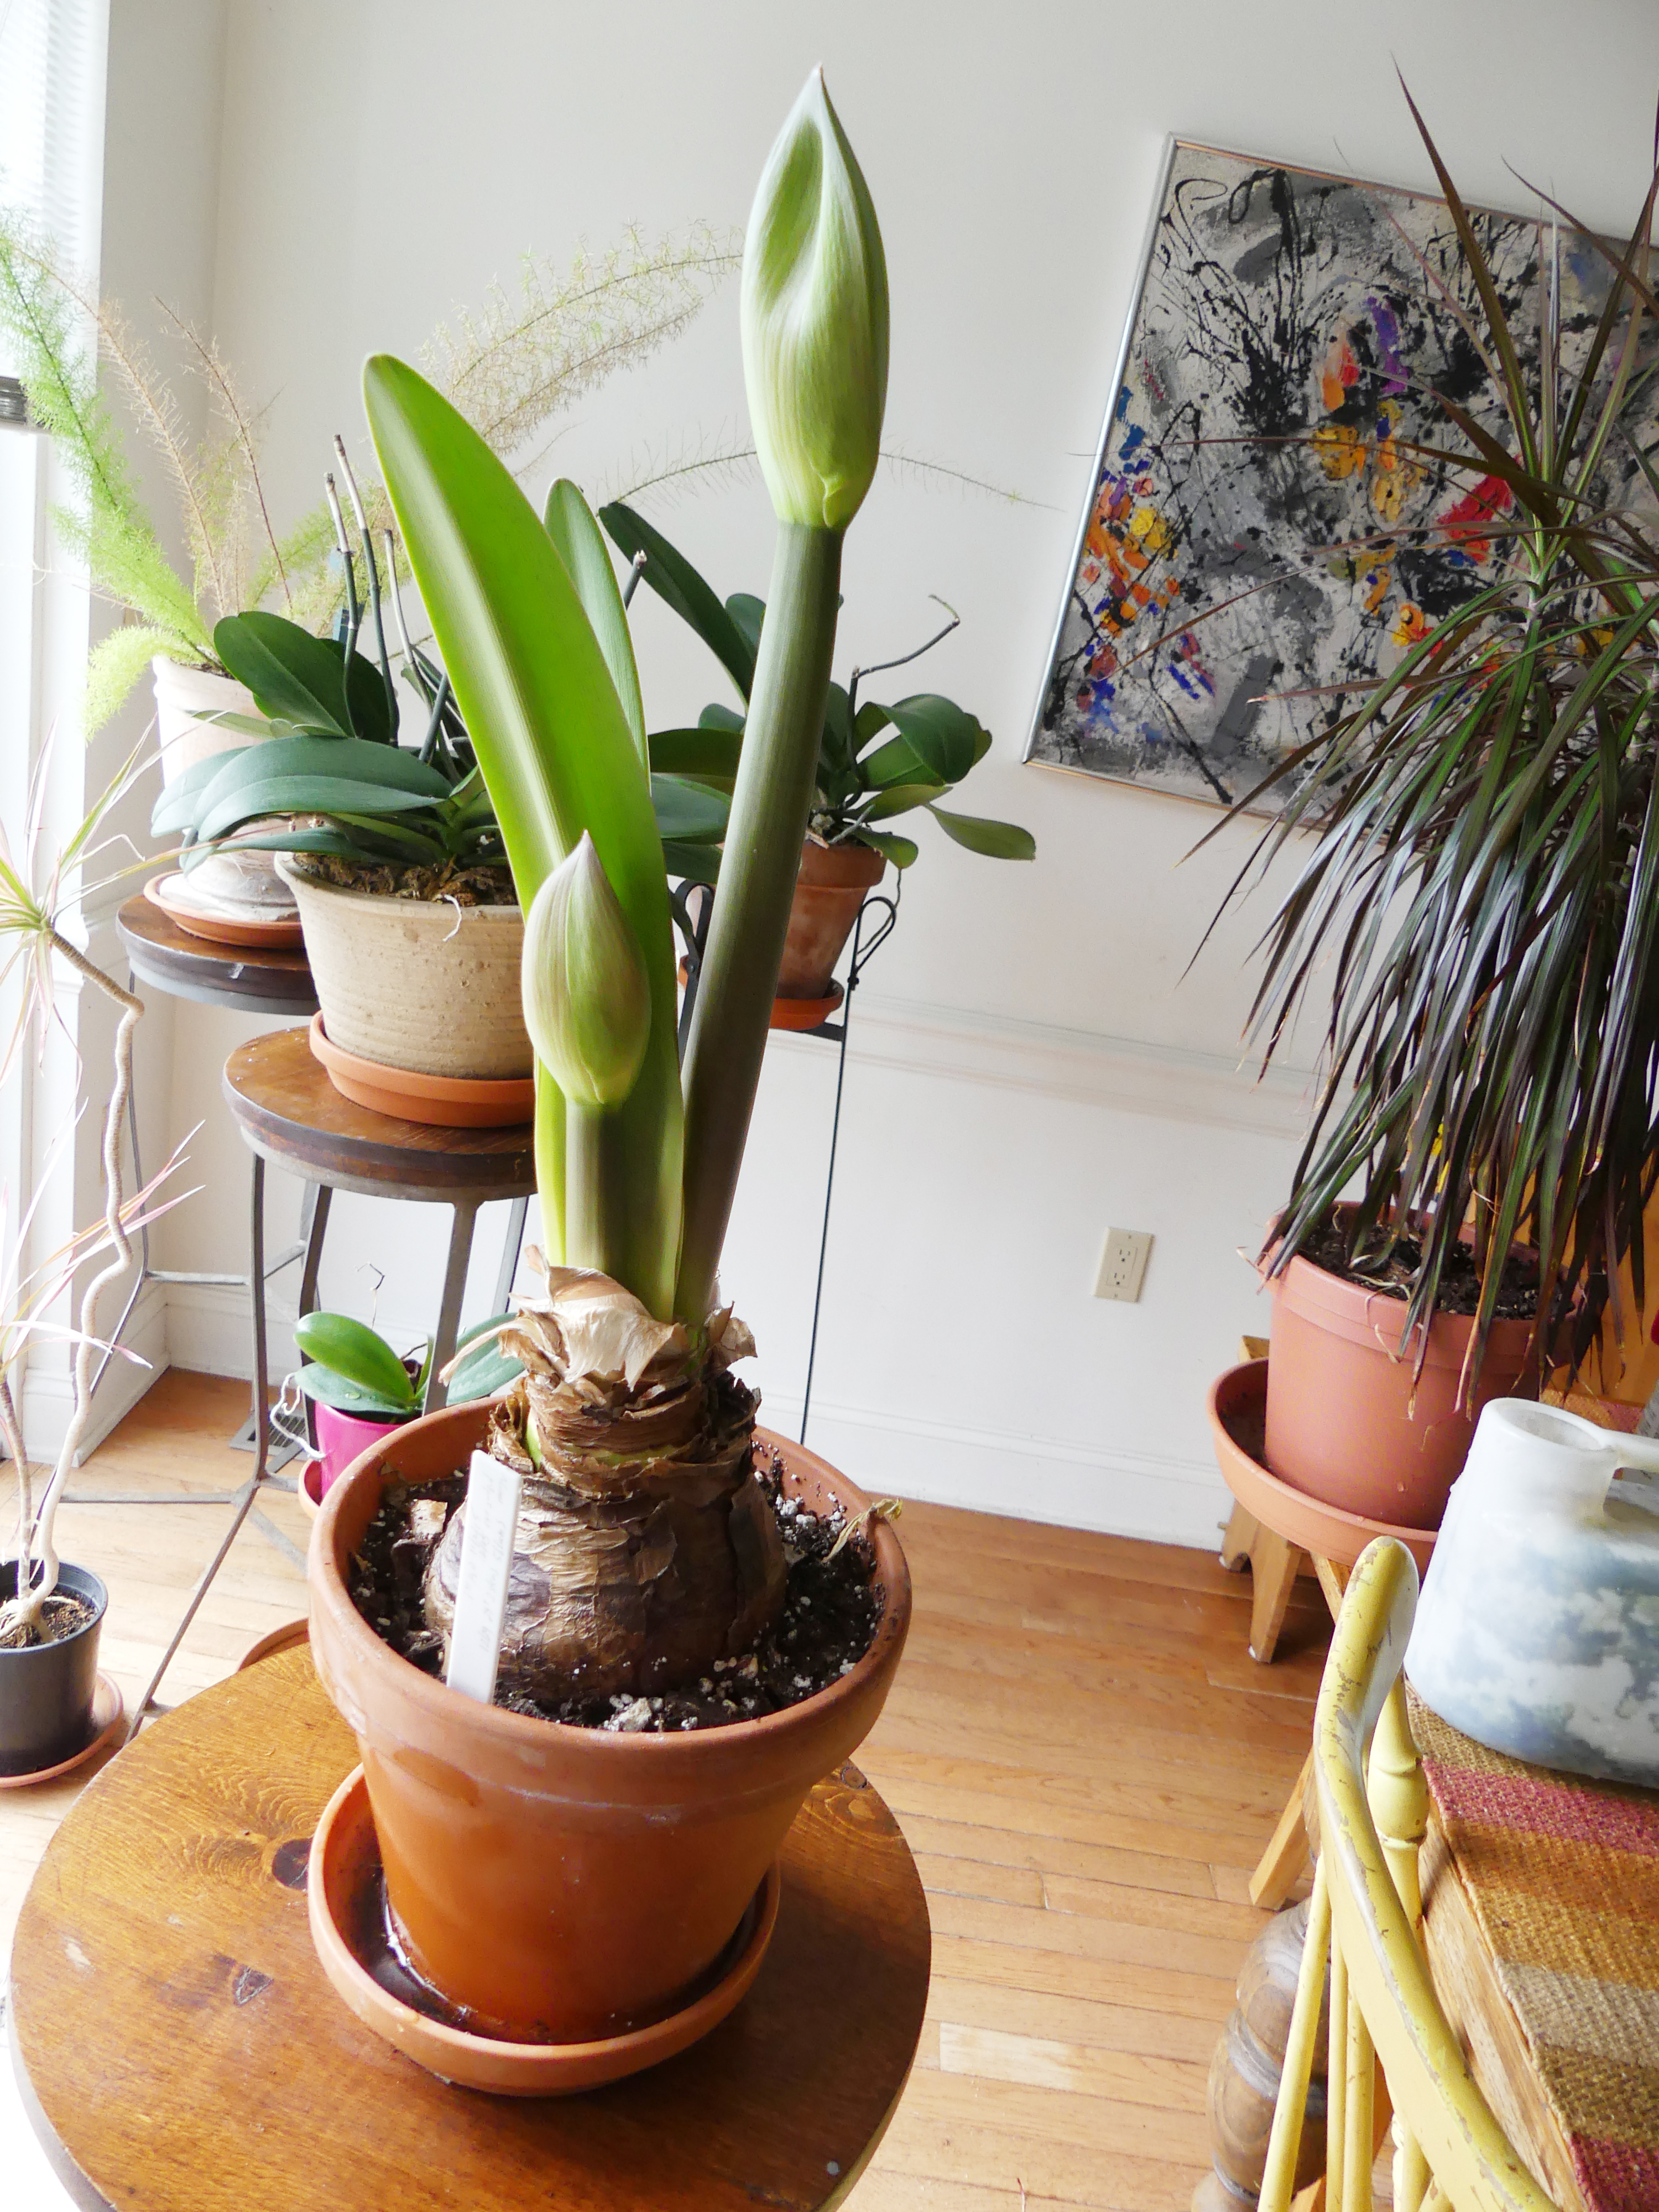 It’s not uncommon for a healthy Amaryllis bulb to produce two flower spikes each year. The foliage develops as the spikes emerge or after flowering. This bulb is about a week away from its first blooms. ANDREW MESSINGER